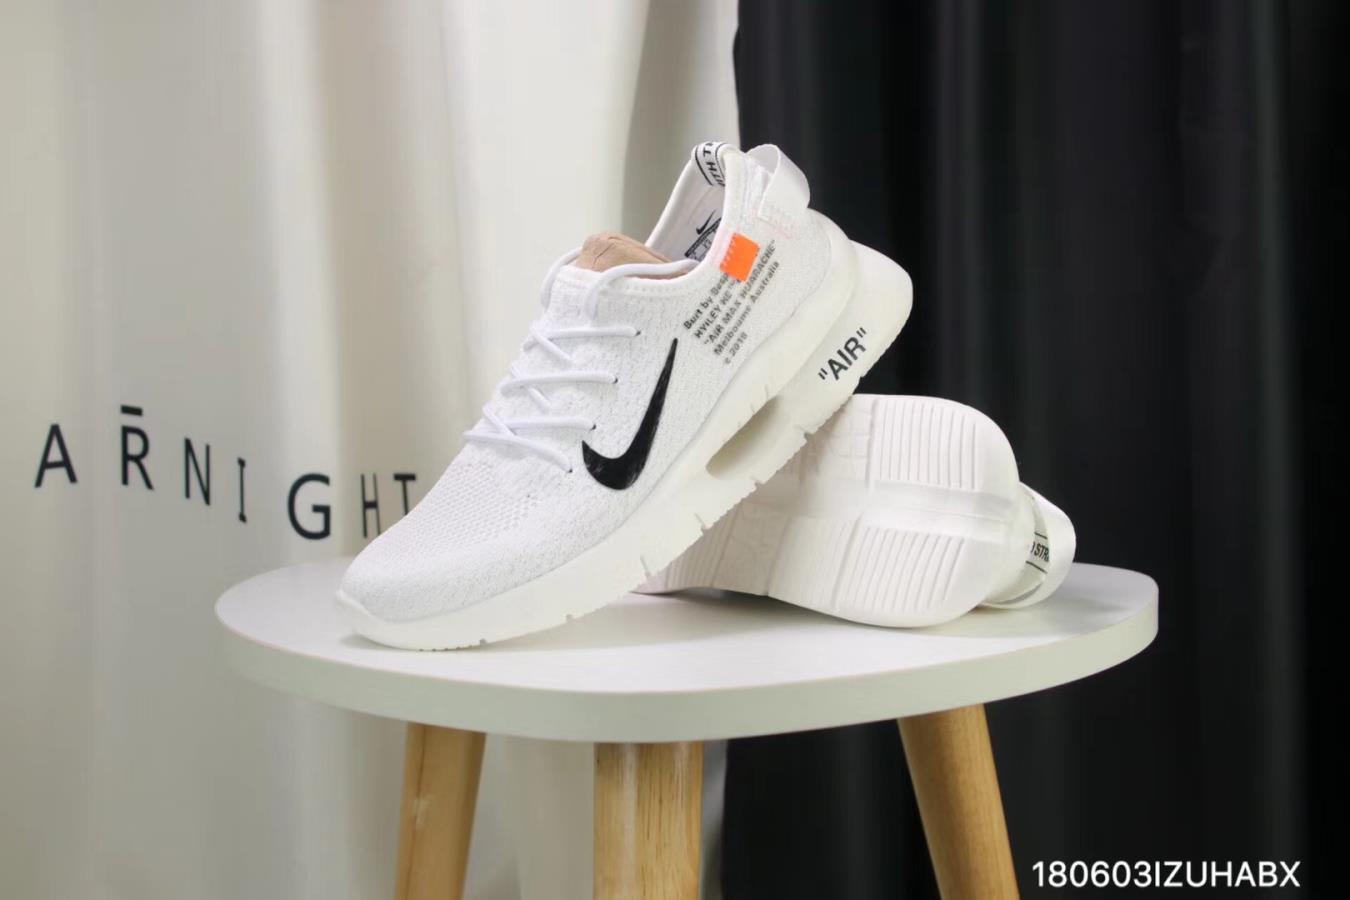 Off-white the Nike Air Max 87 OG Flyknit White Black Shoes